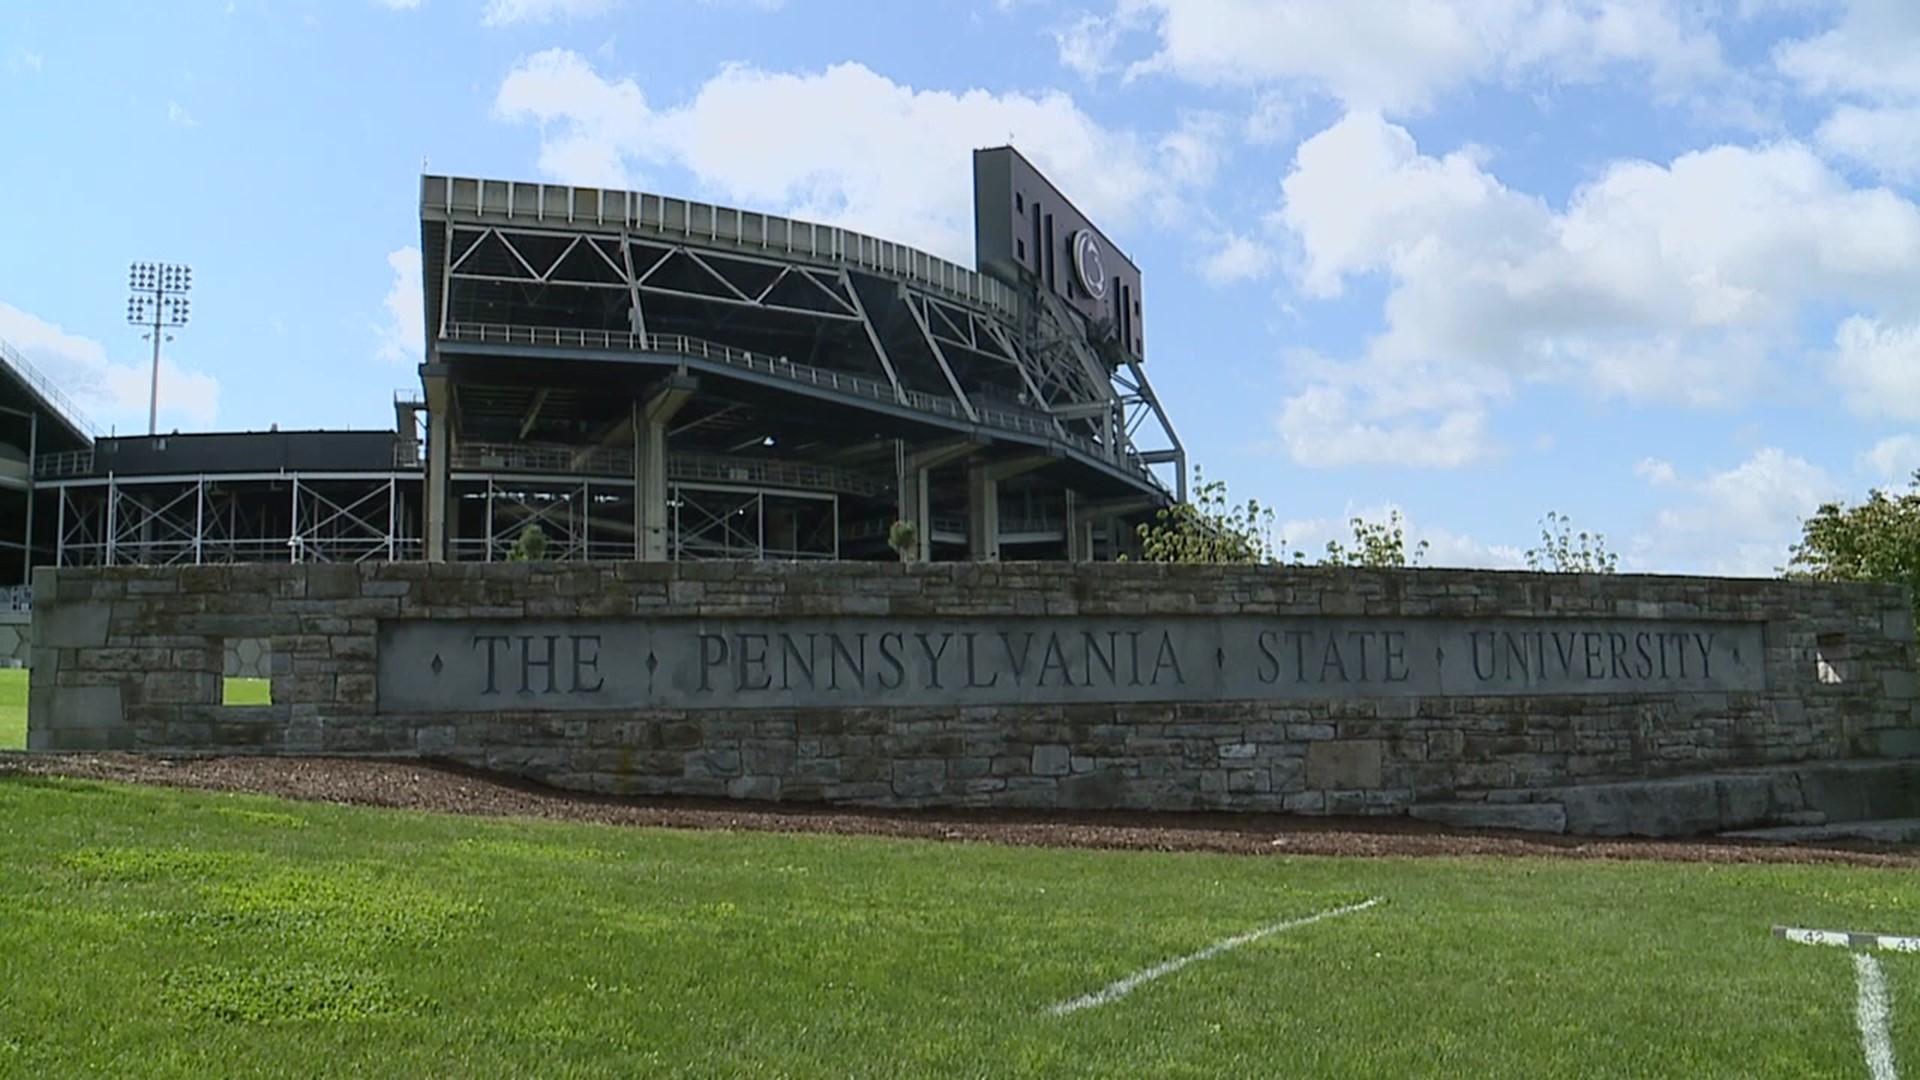 Officials at Penn State University have lots of new things in store for football fans this season.